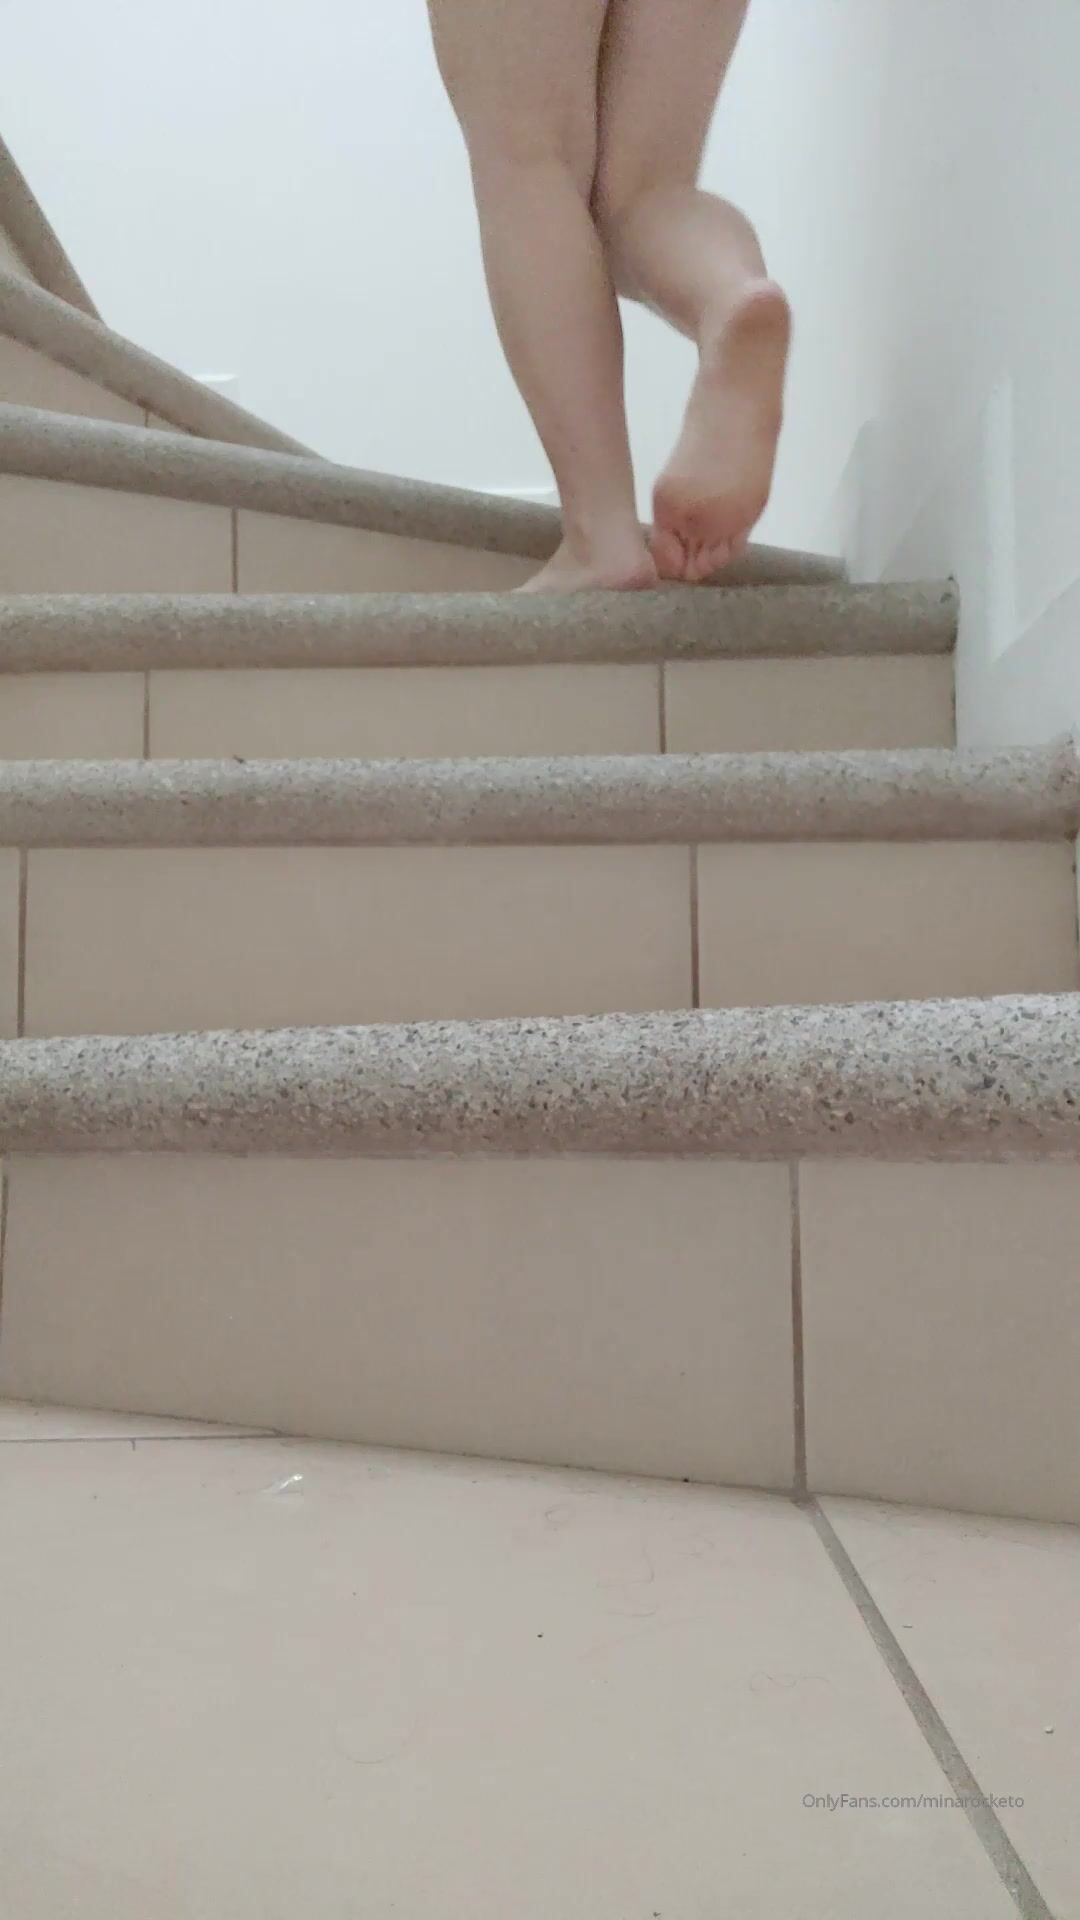 Minarocket onlyfans walking the stairs naked video xxx onlyfans porn video picture